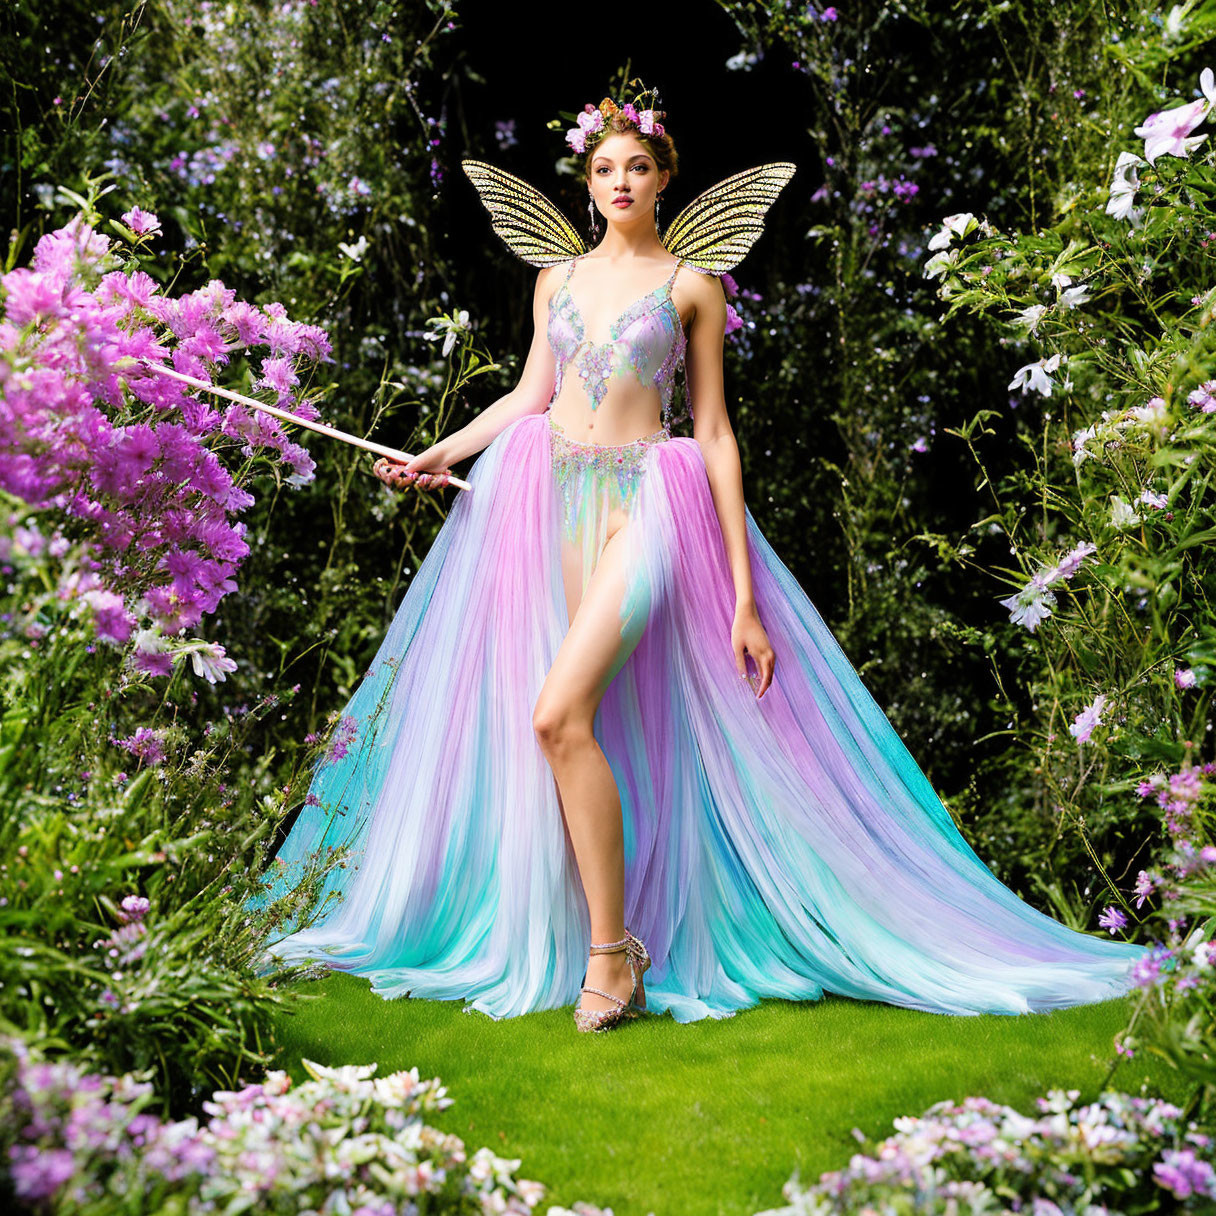 Imagine a fairy with iridescent wings